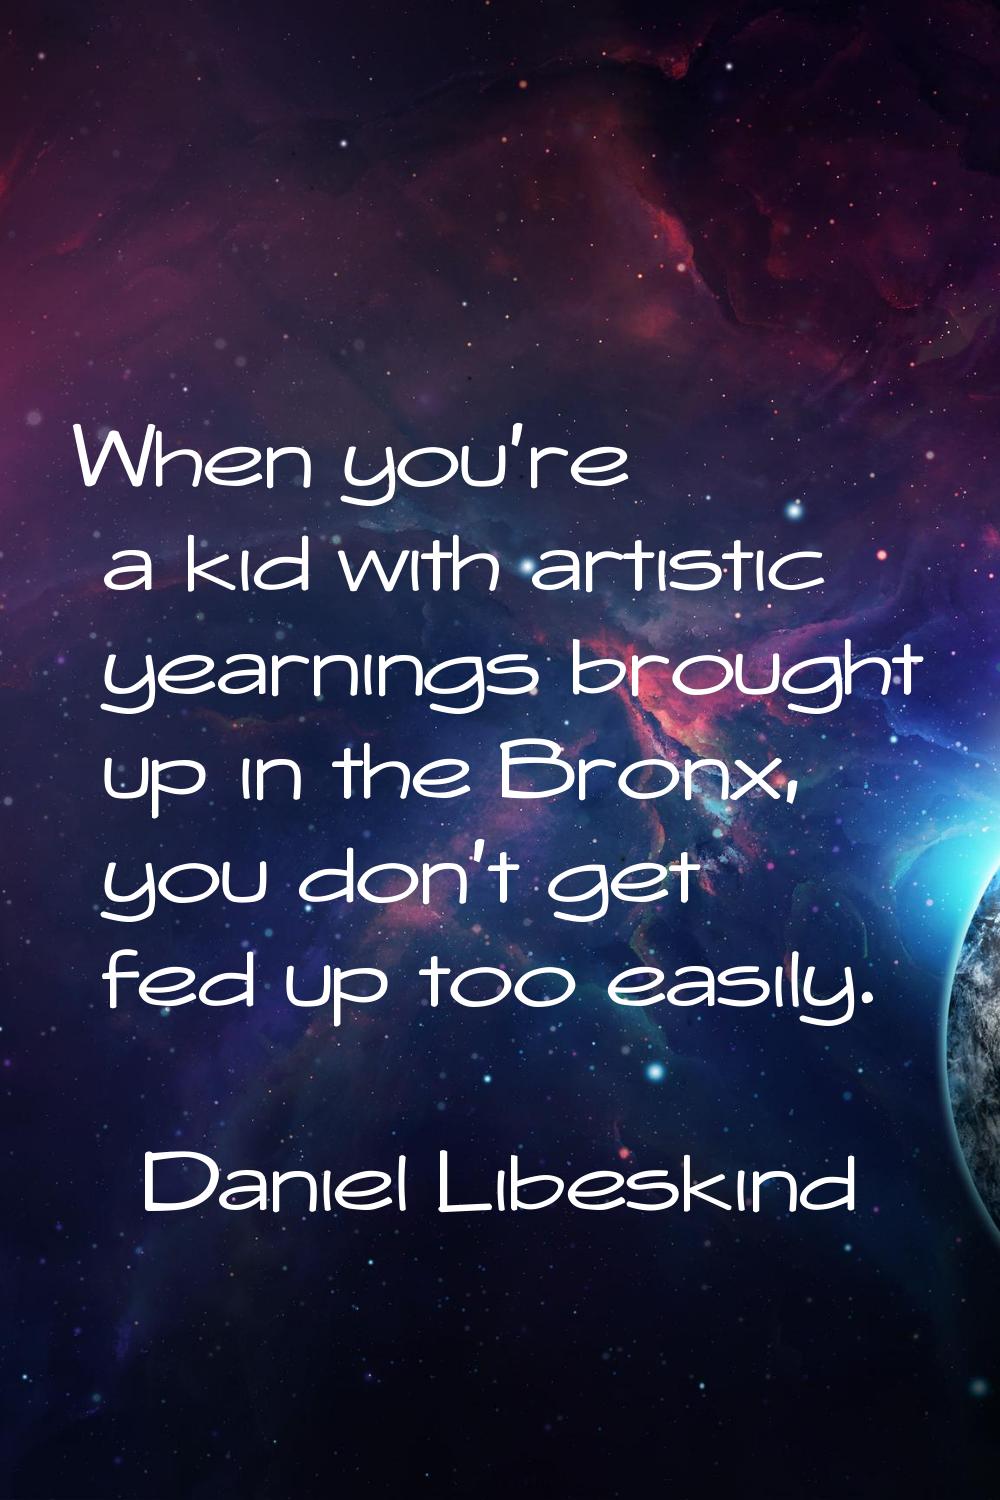 When you're a kid with artistic yearnings brought up in the Bronx, you don't get fed up too easily.